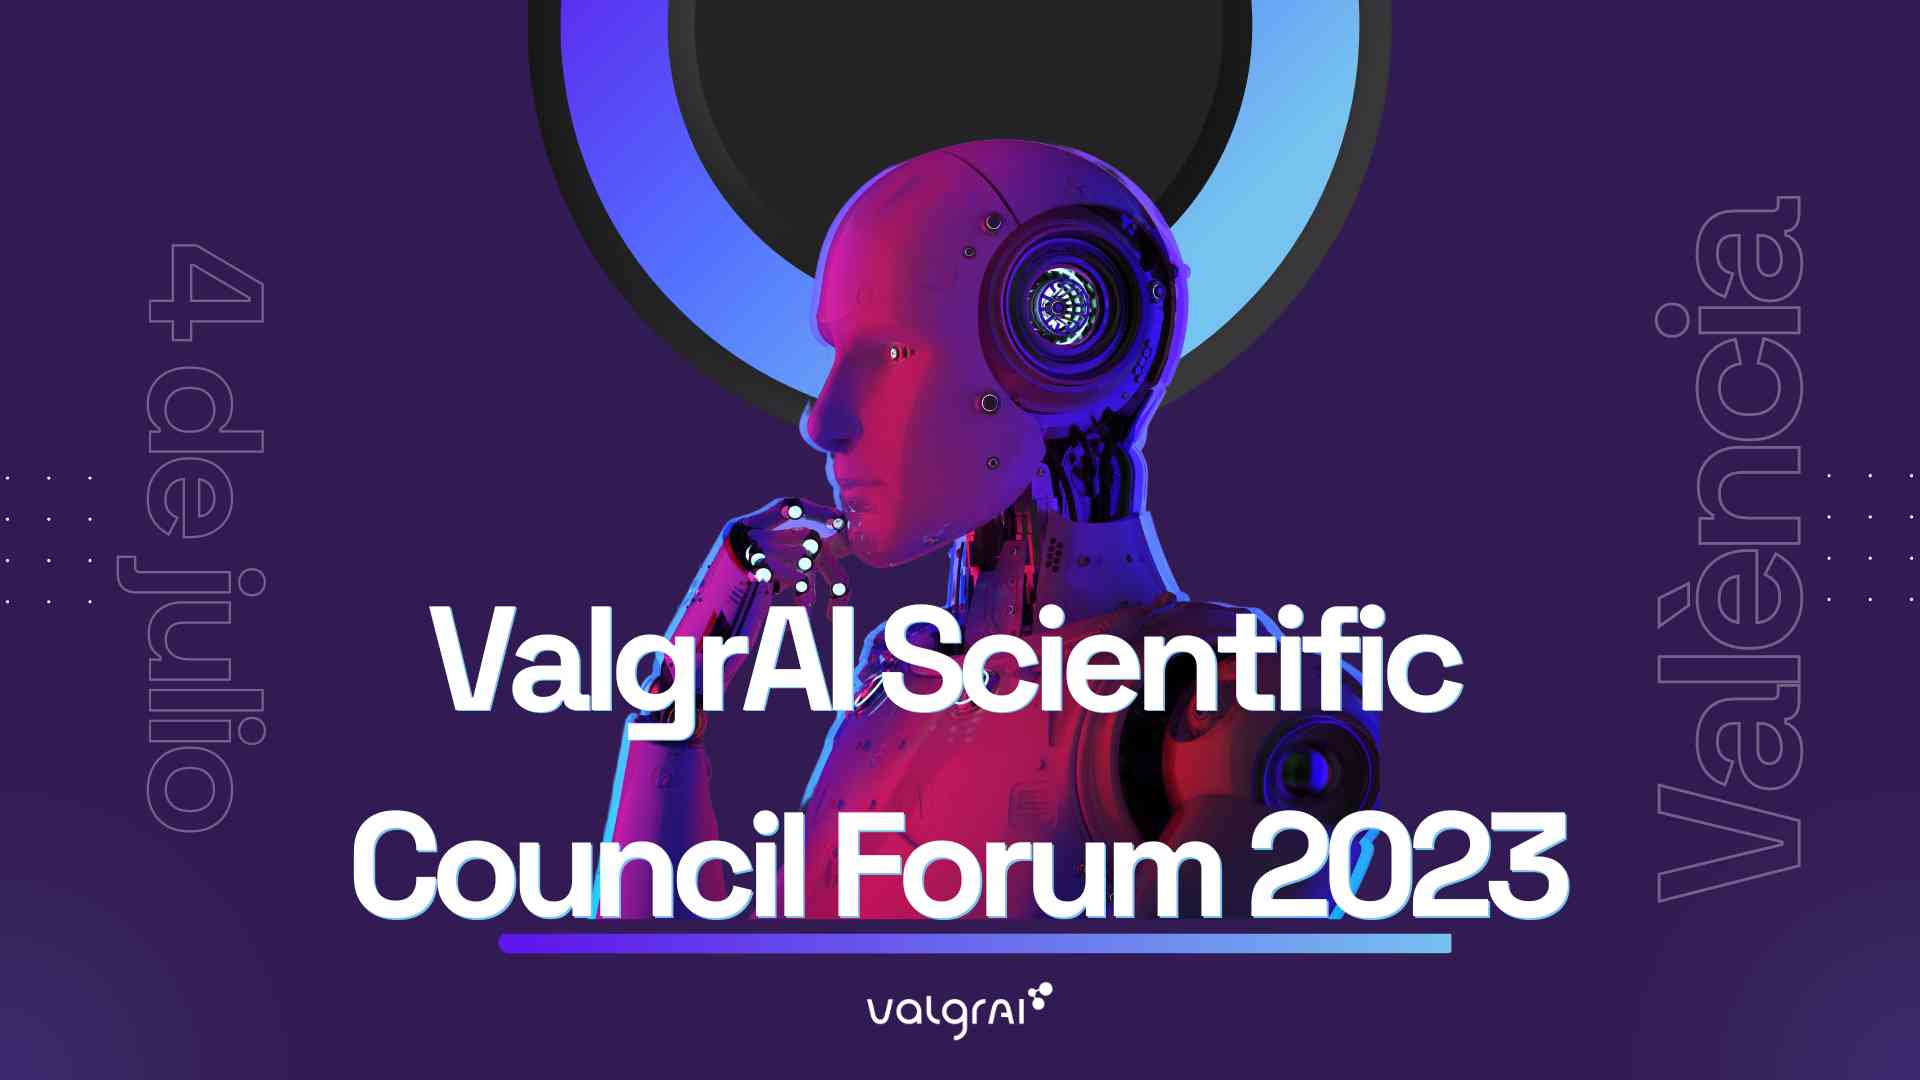 ValgrAI brings together the main exponents of Artificial Intelligence at UPV